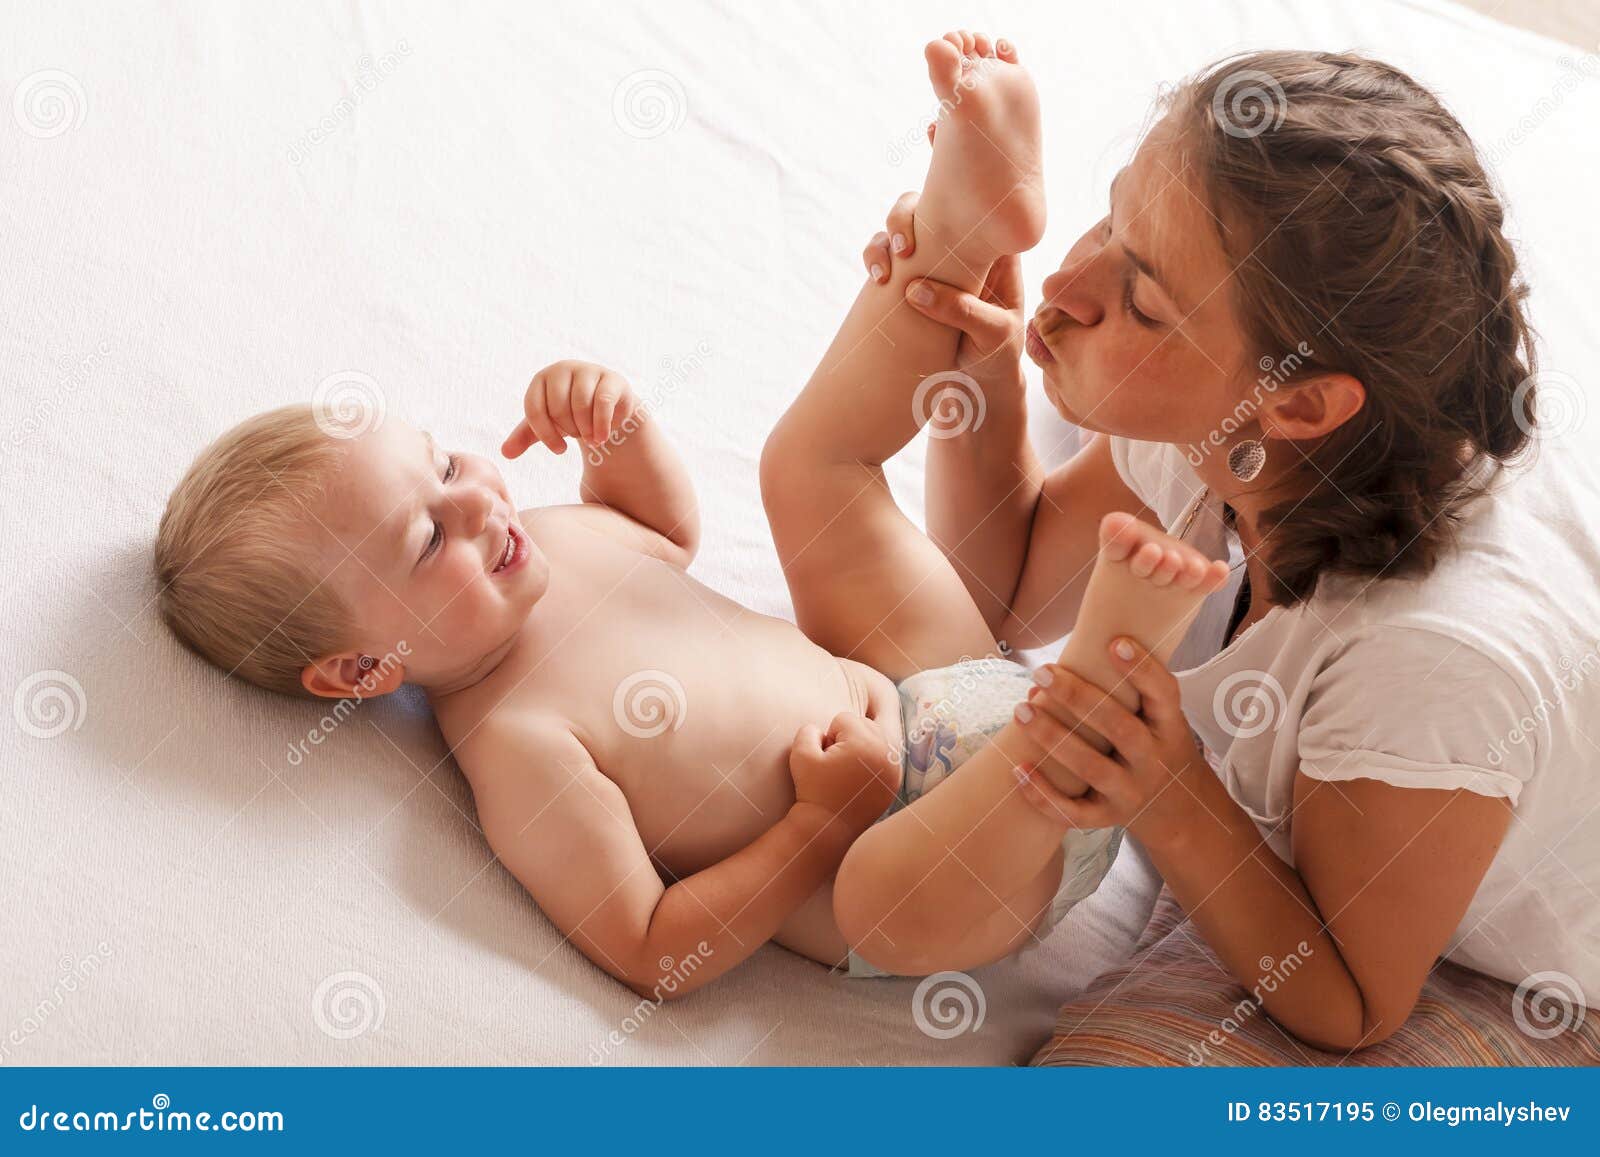 Mom Play Change Baby Son Diaper Stock Image - Image of little ...